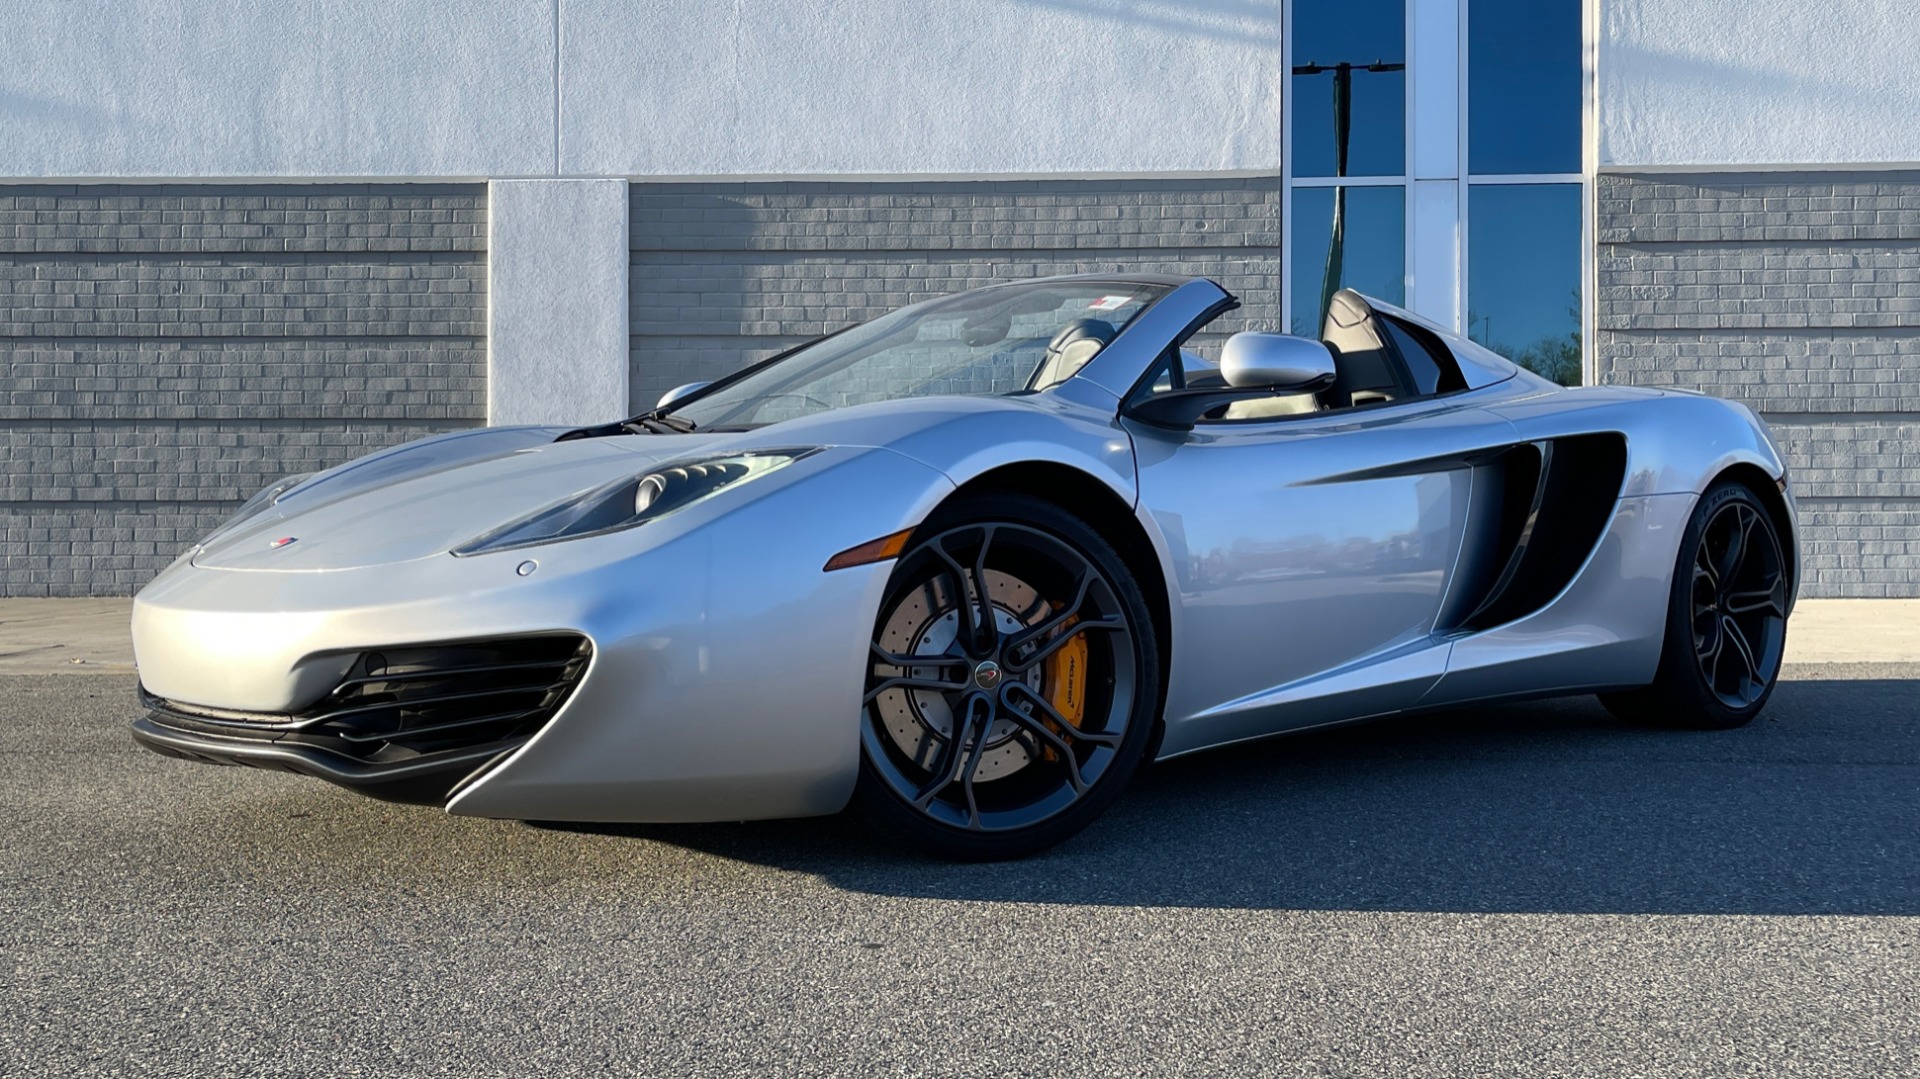 Used 2013 McLaren MP4 12C SPIDER 3.8L TURBO V8 616HP / 7AM TRANS / NAV / MERIDIAN SND for sale $145,000 at Formula Imports in Charlotte NC 28227 7